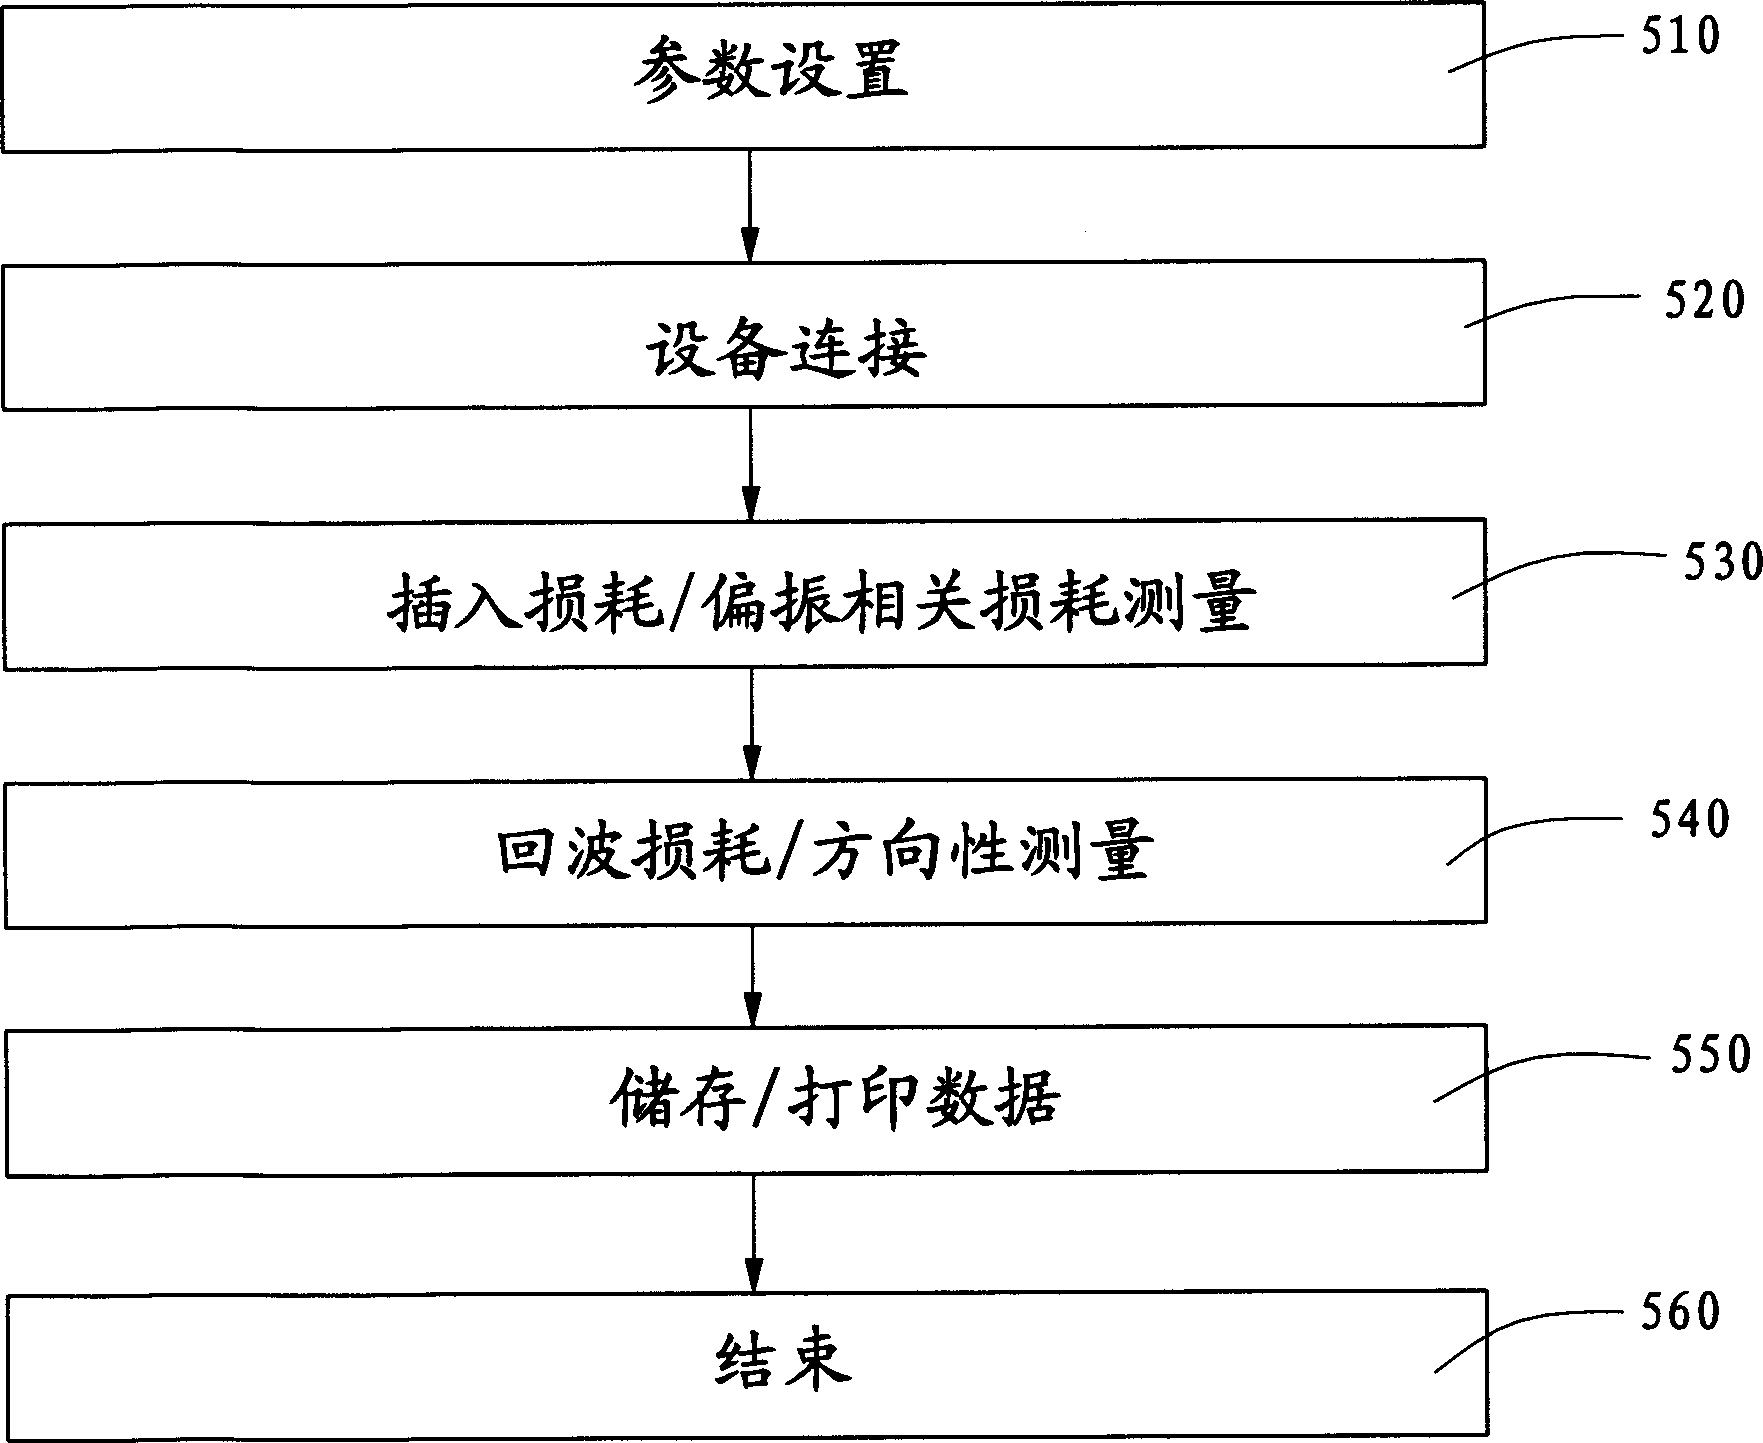 Wavelength division multiplexer test system and its test method